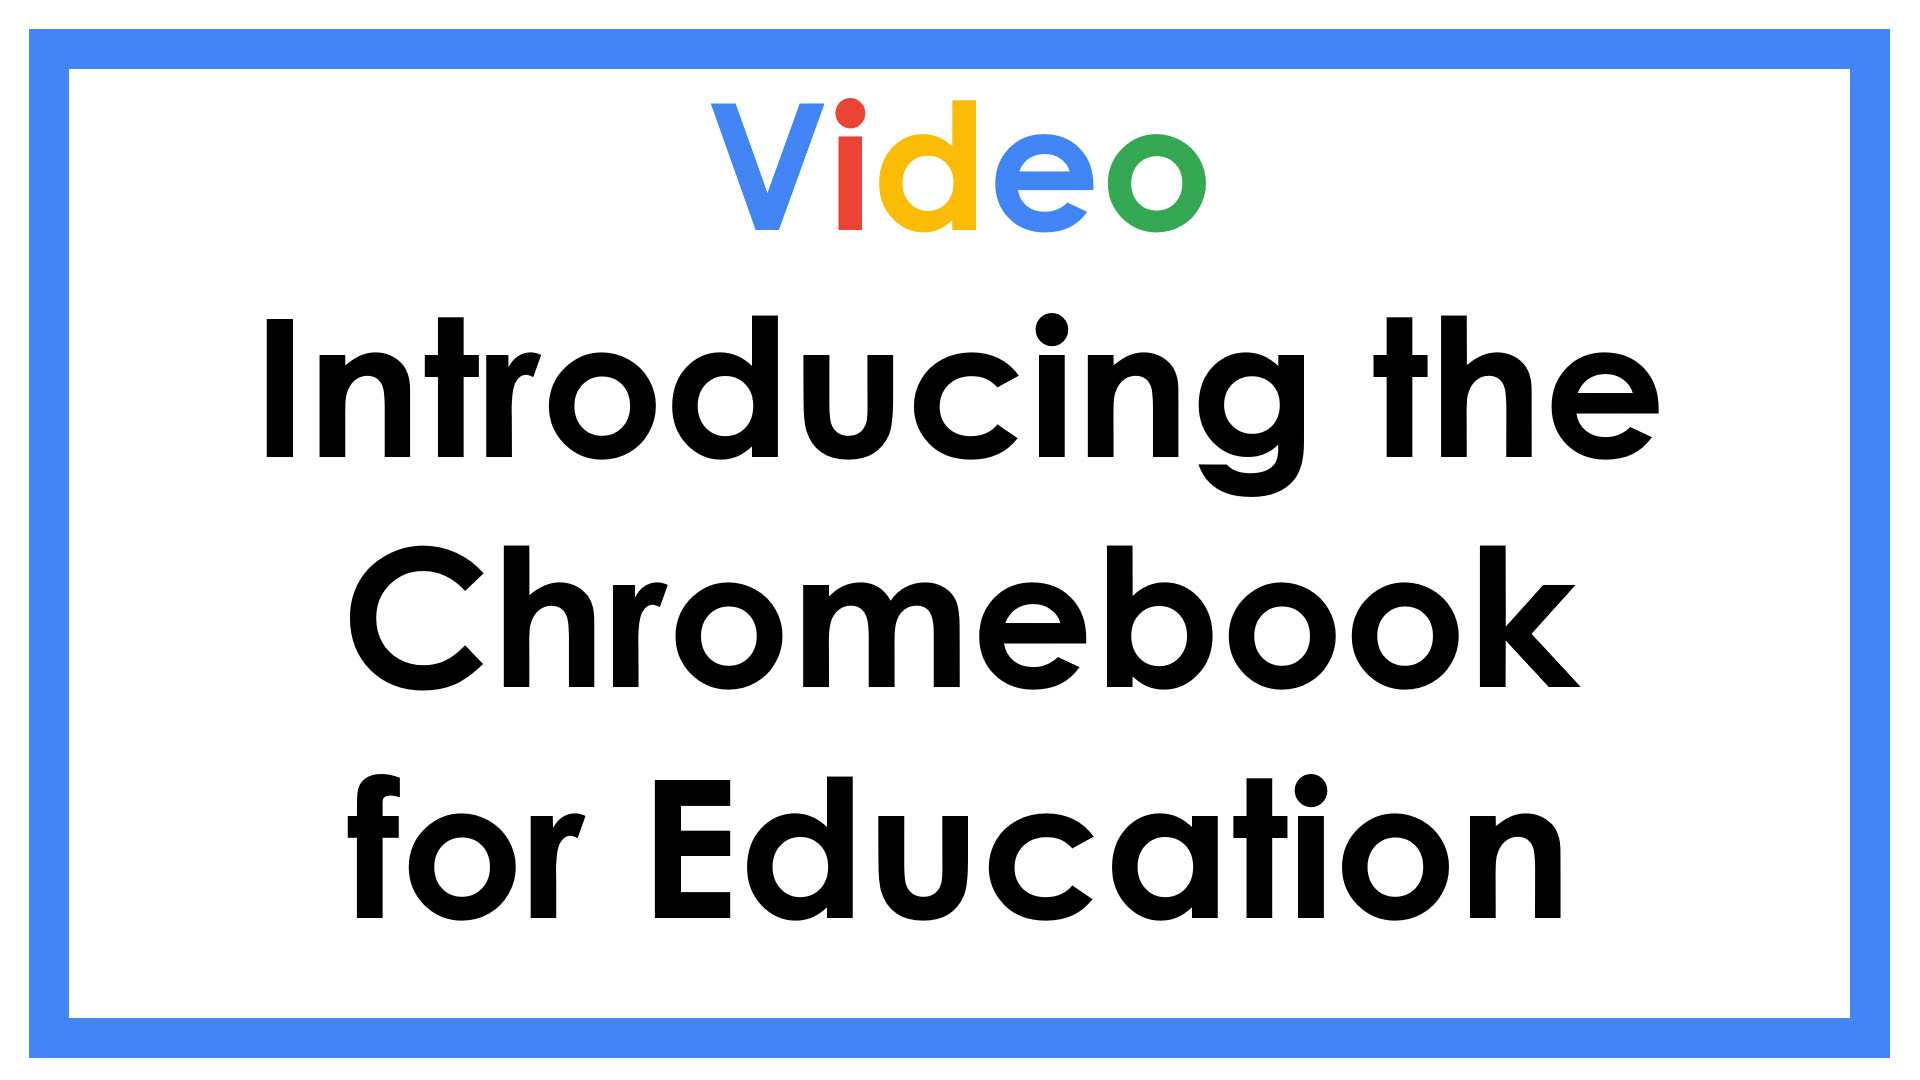 Video Introducing the Chromebook for Education